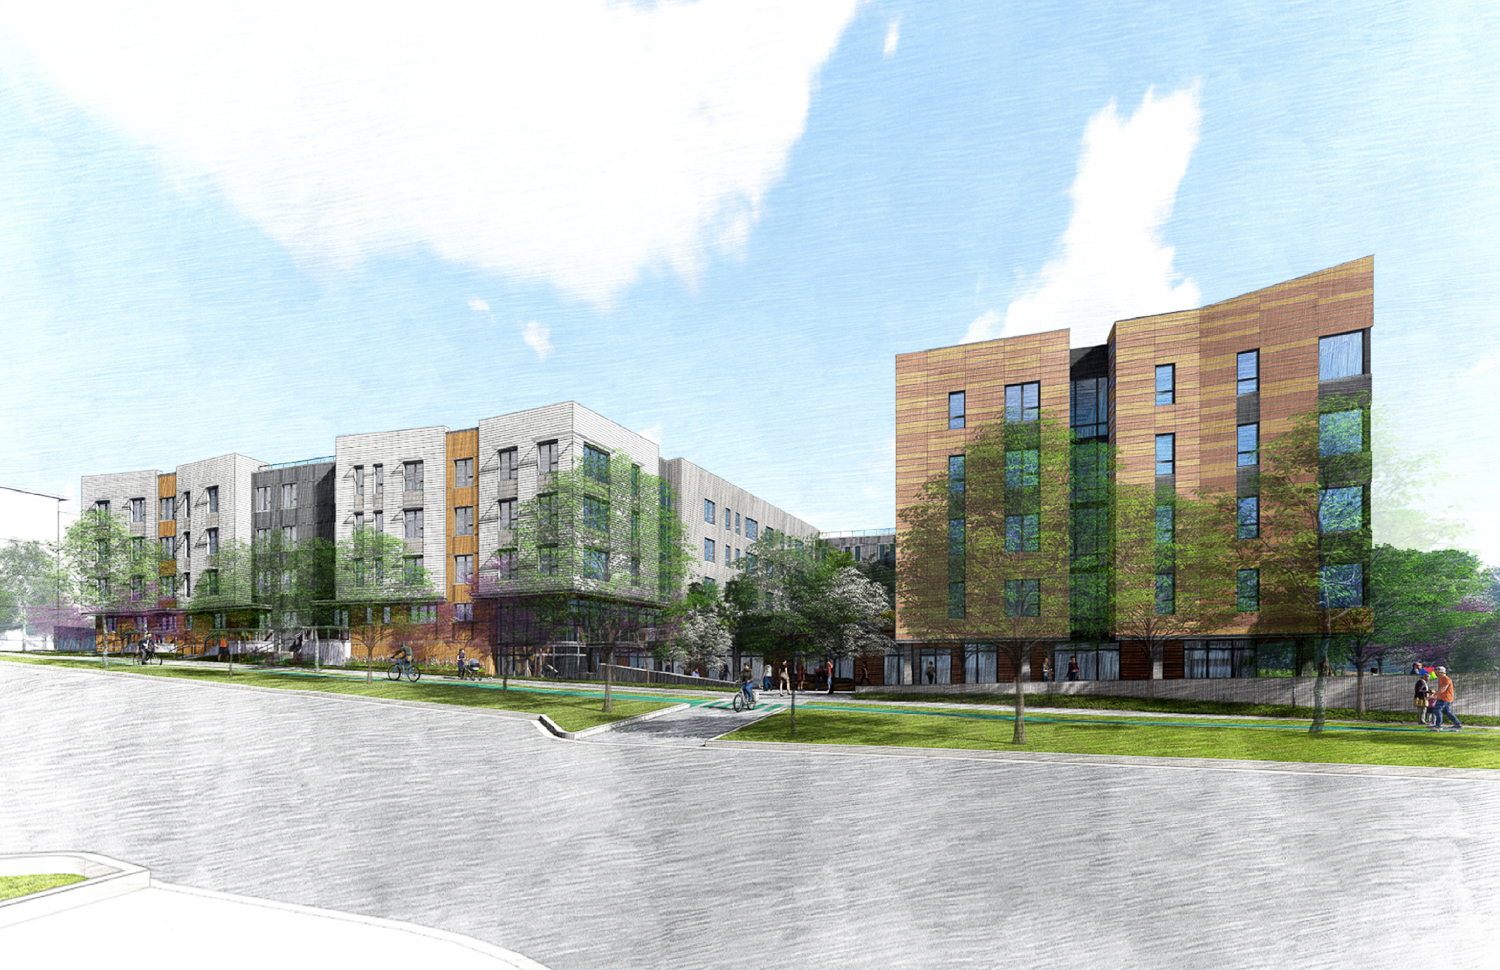 Sunnydale Block 9 seen from Sunnydale and Santos, rendering by VMWP and Kerman Morris Architects